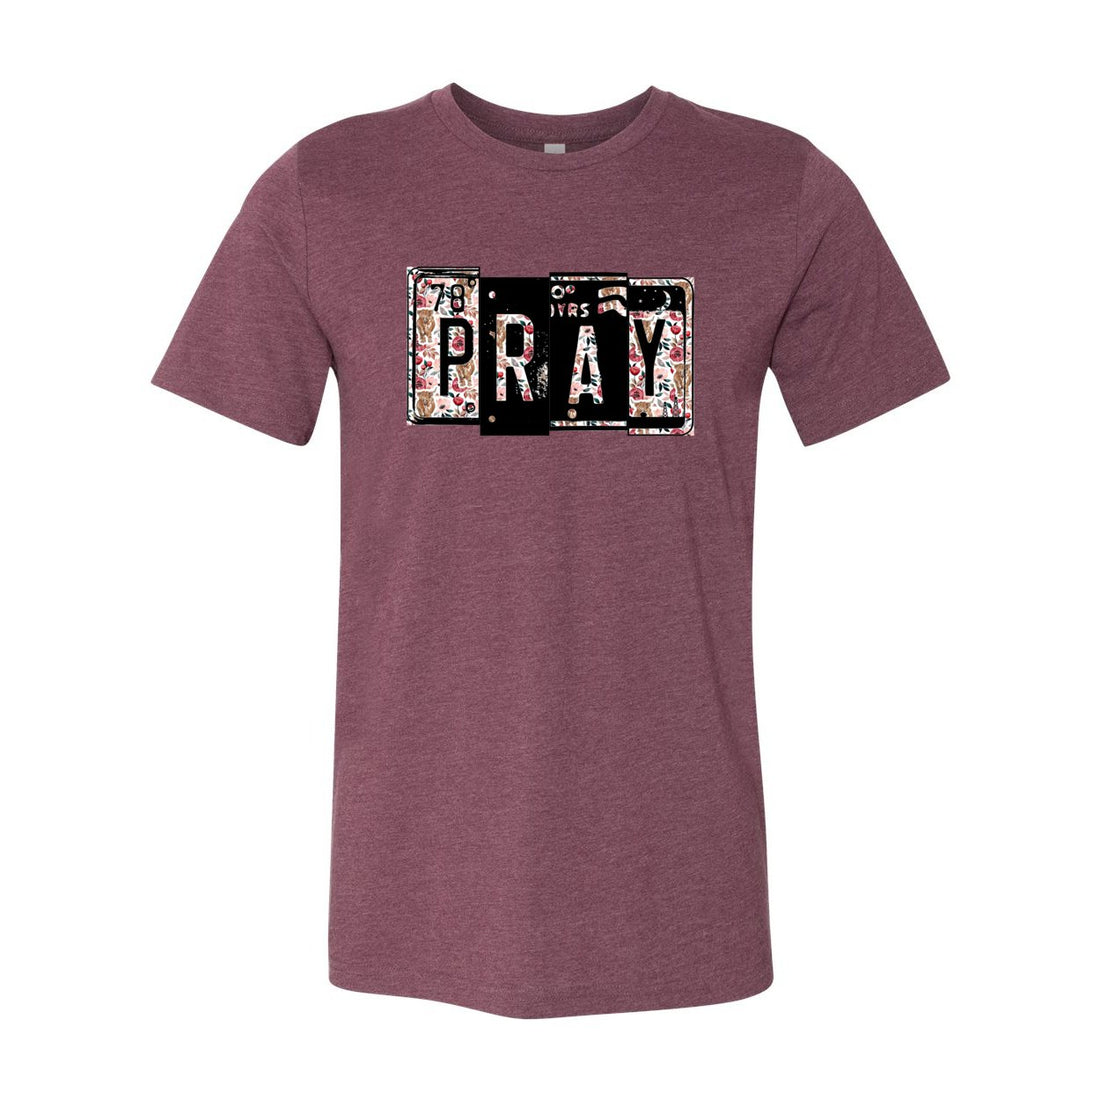 Pray Plates Tee Jersey Tee - T-Shirts - Positively Sassy - Pray Plates Tee Jersey Tee